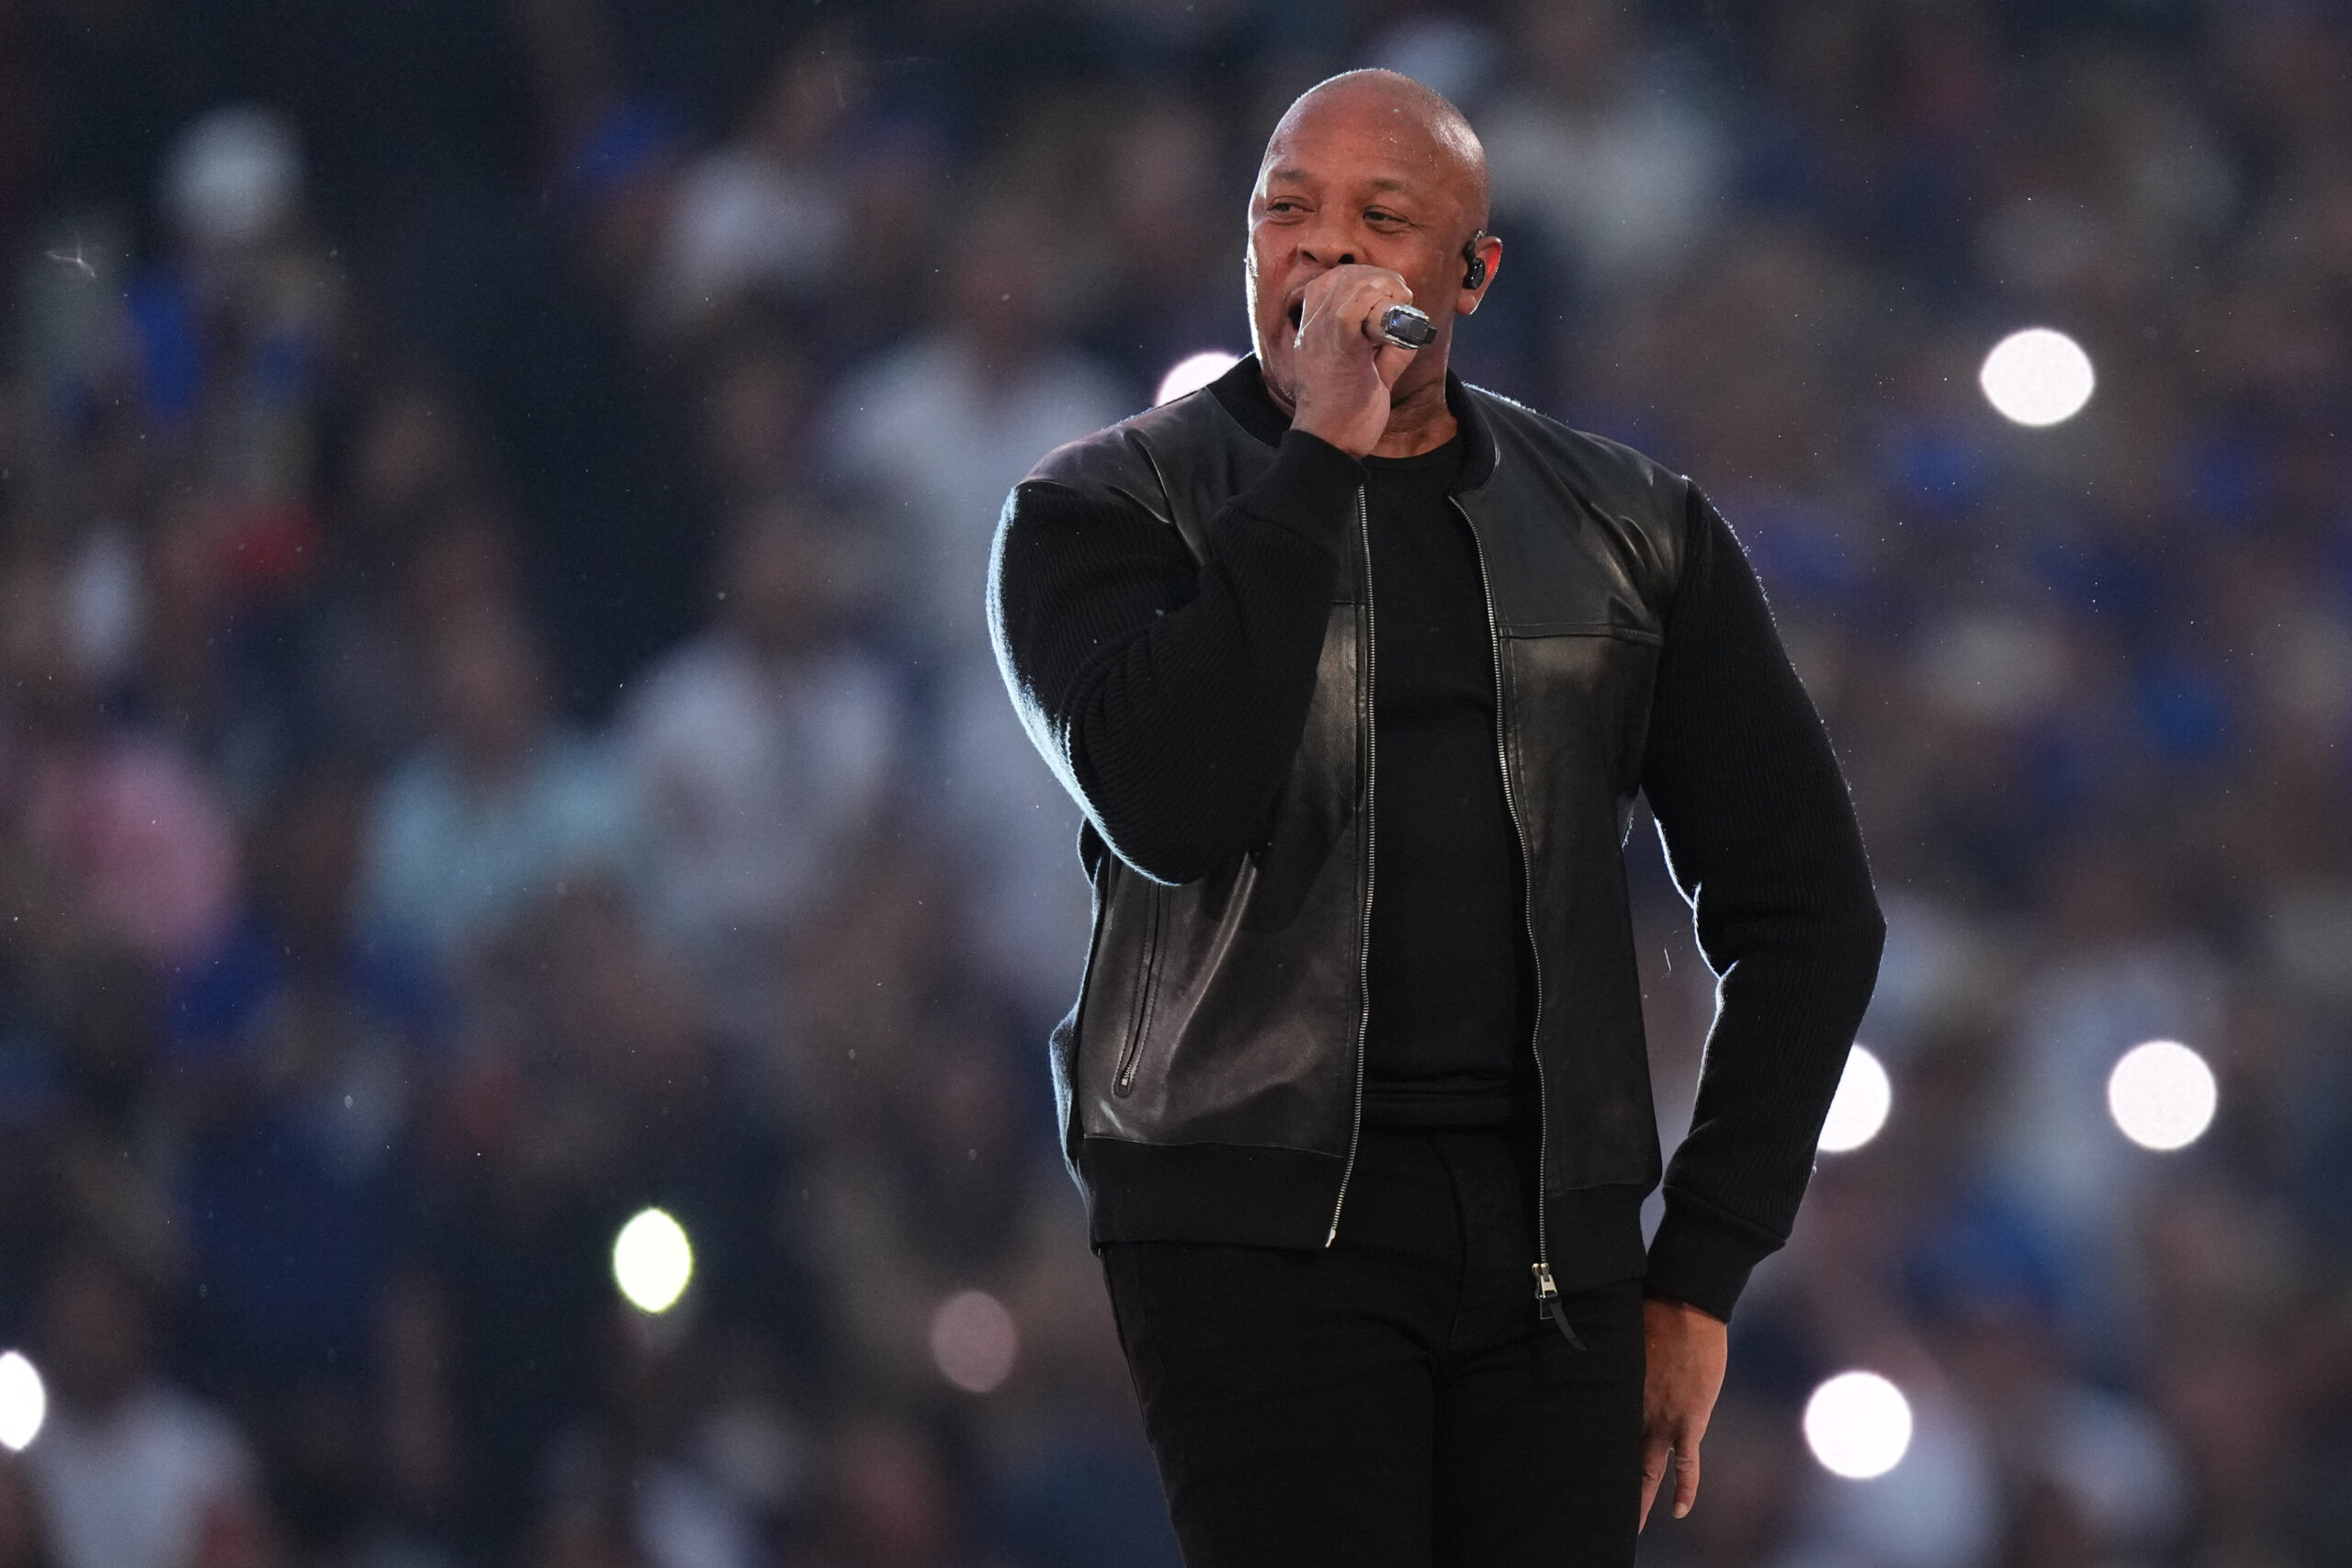 Dr. Dre Reveals Jay-Z and Nas Convinced Him to Do Super Bowl Halftime Show After Producer Feared Looking Like a ‘Sellout’ 